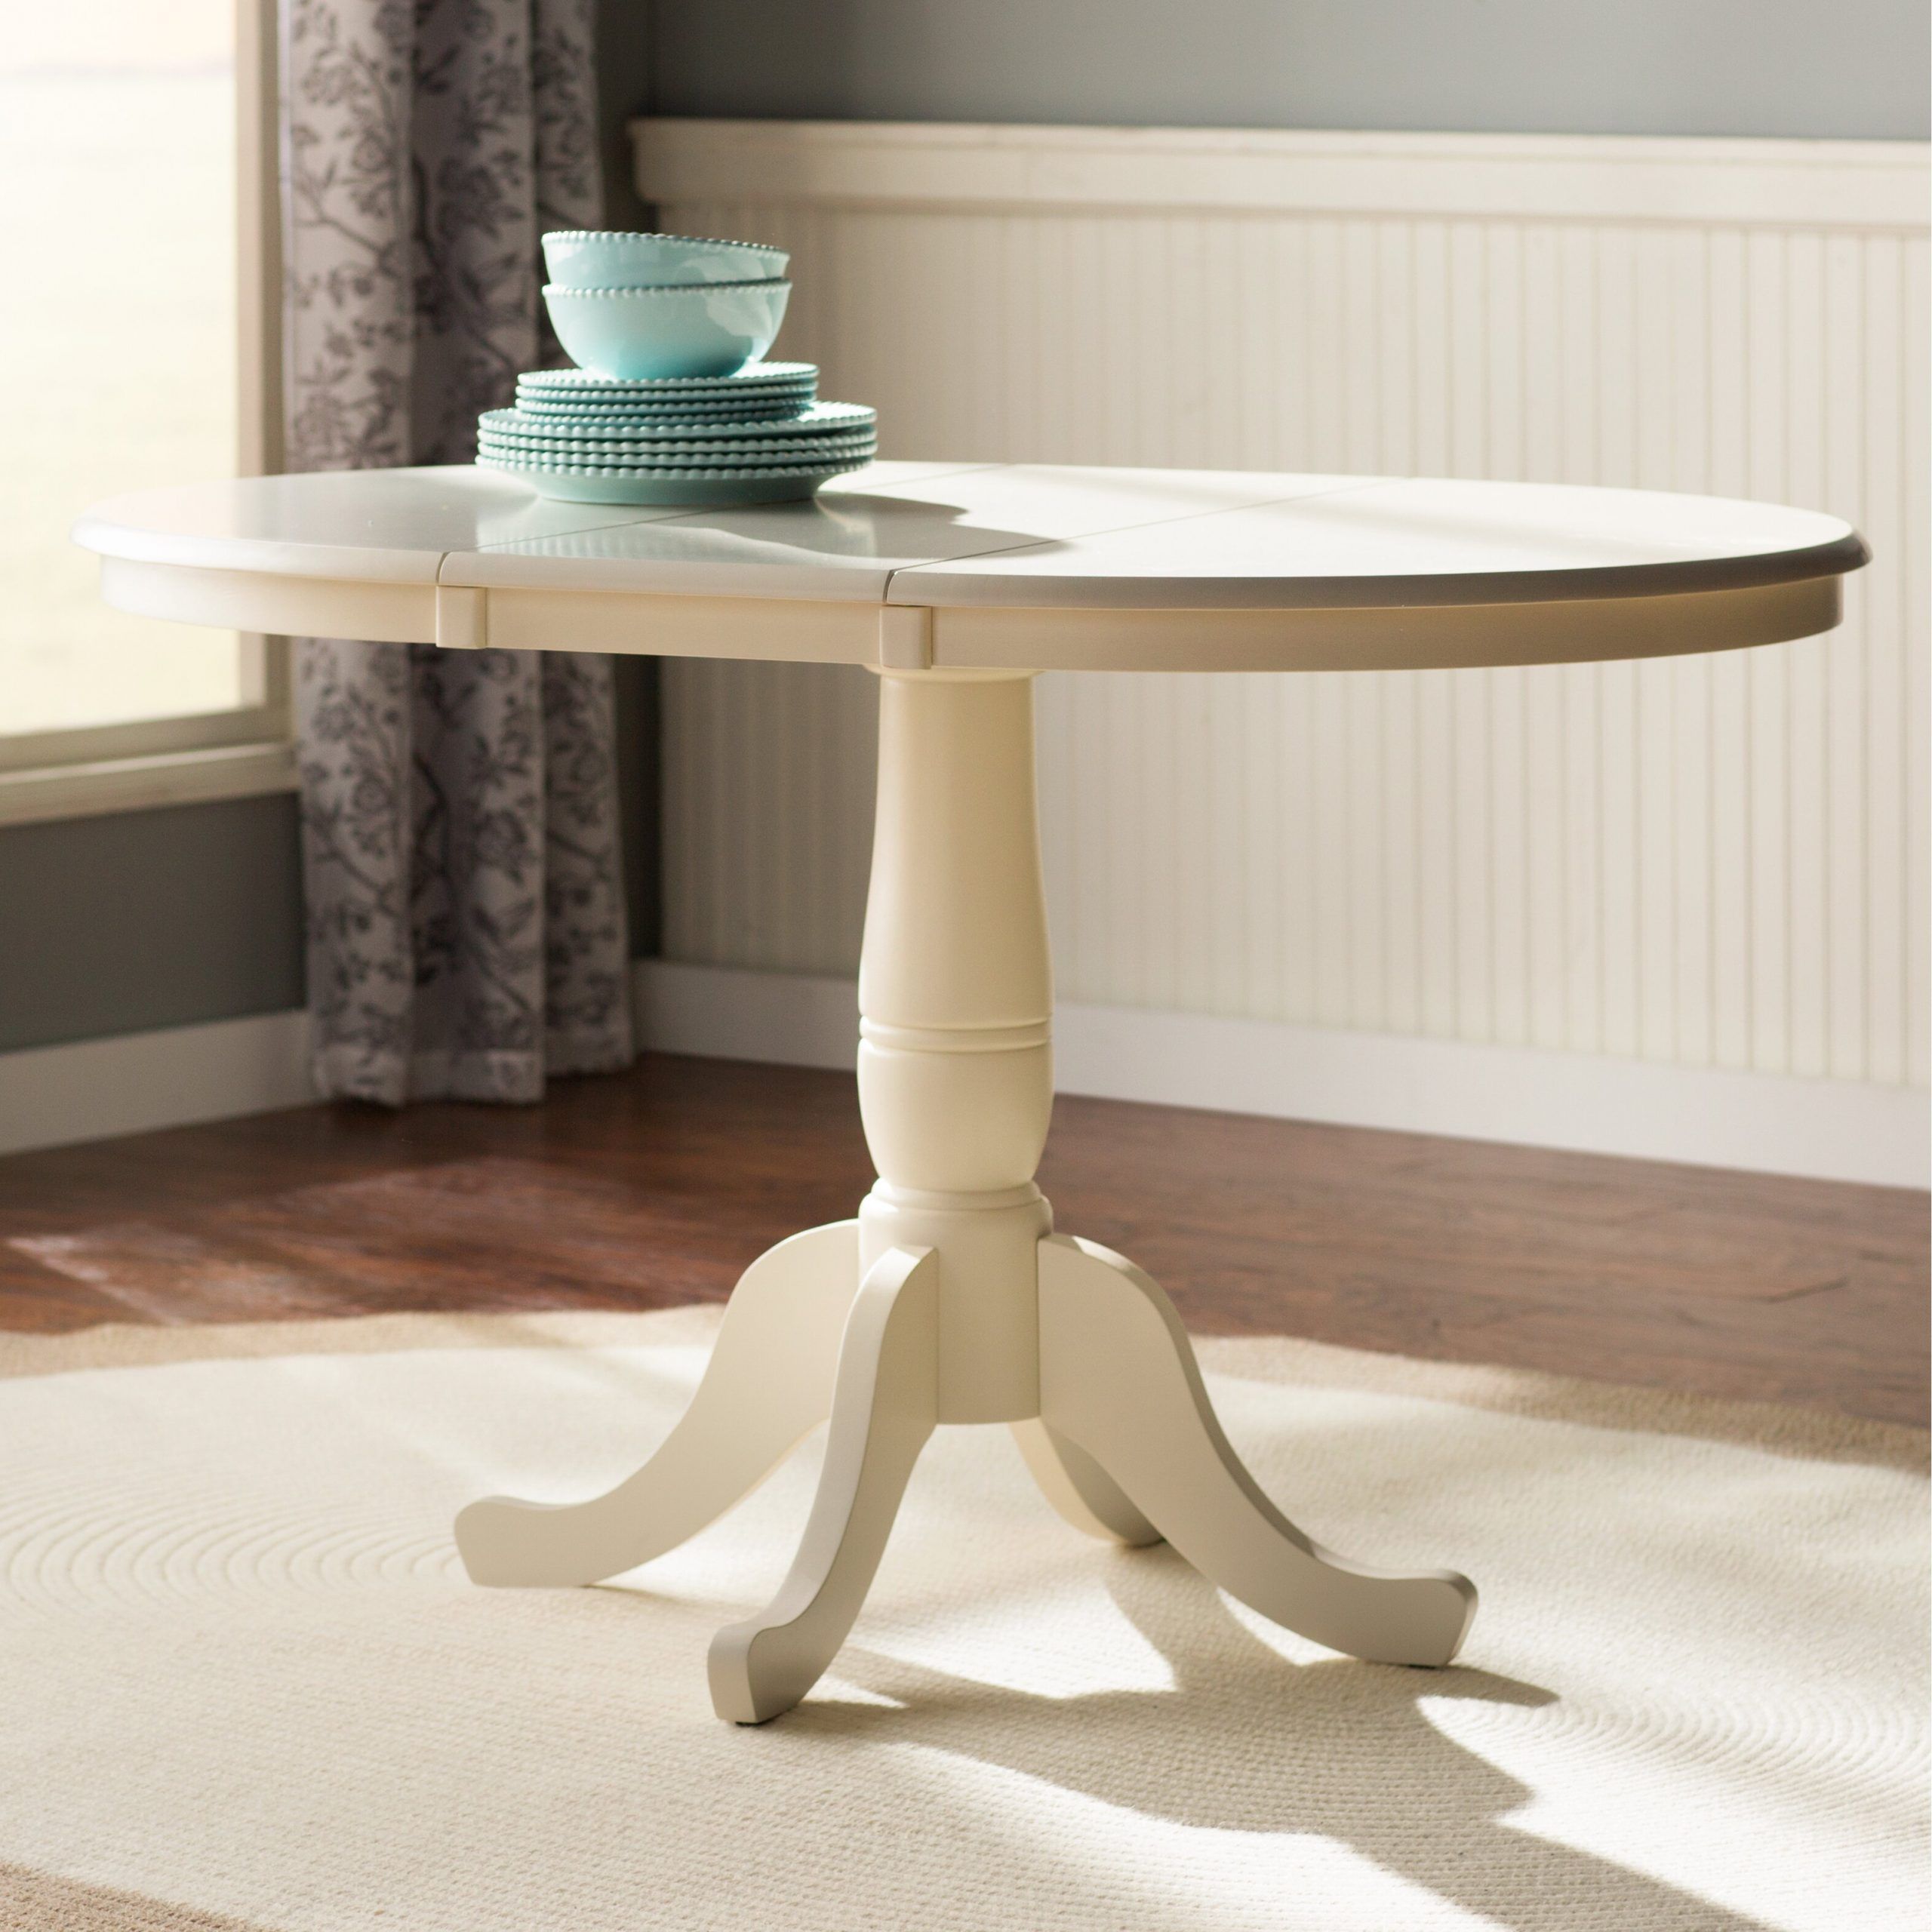 August Grove 36" Extendable Round Pedestal Dining Table Inside Most Up To Date Round Pedestal Dining Tables With One Leaf (View 6 of 15)